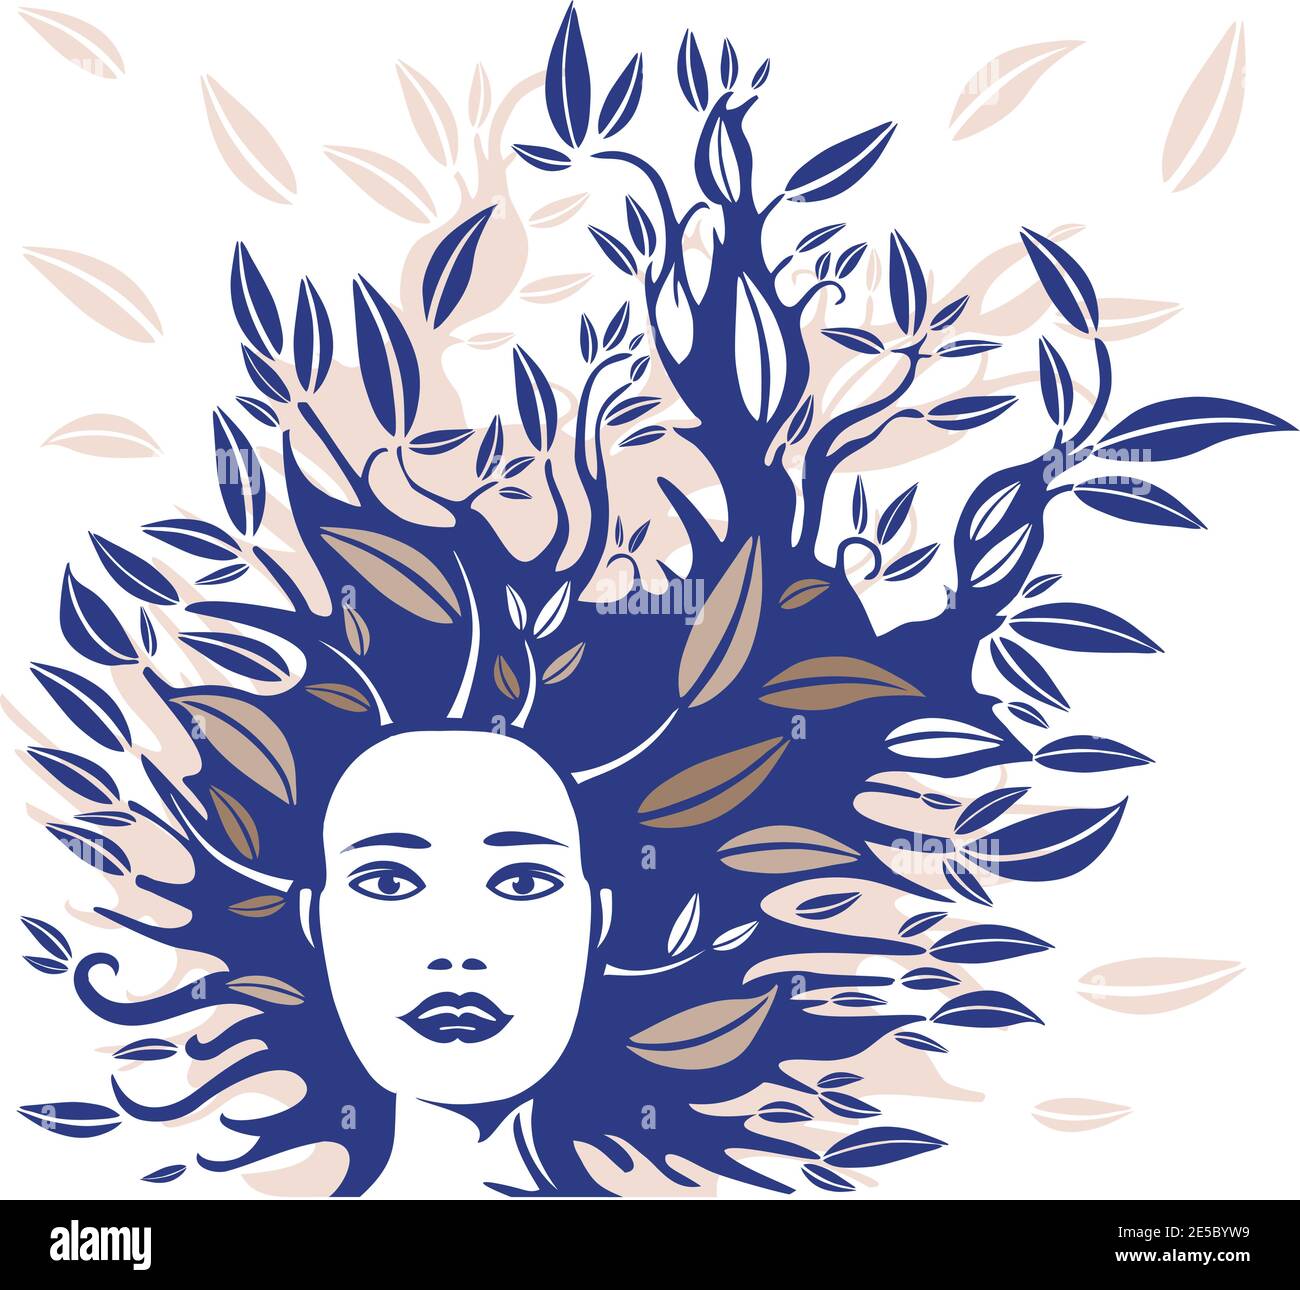 Woman Face with Hair made of Leaves in Blue and Beige Stock Vector